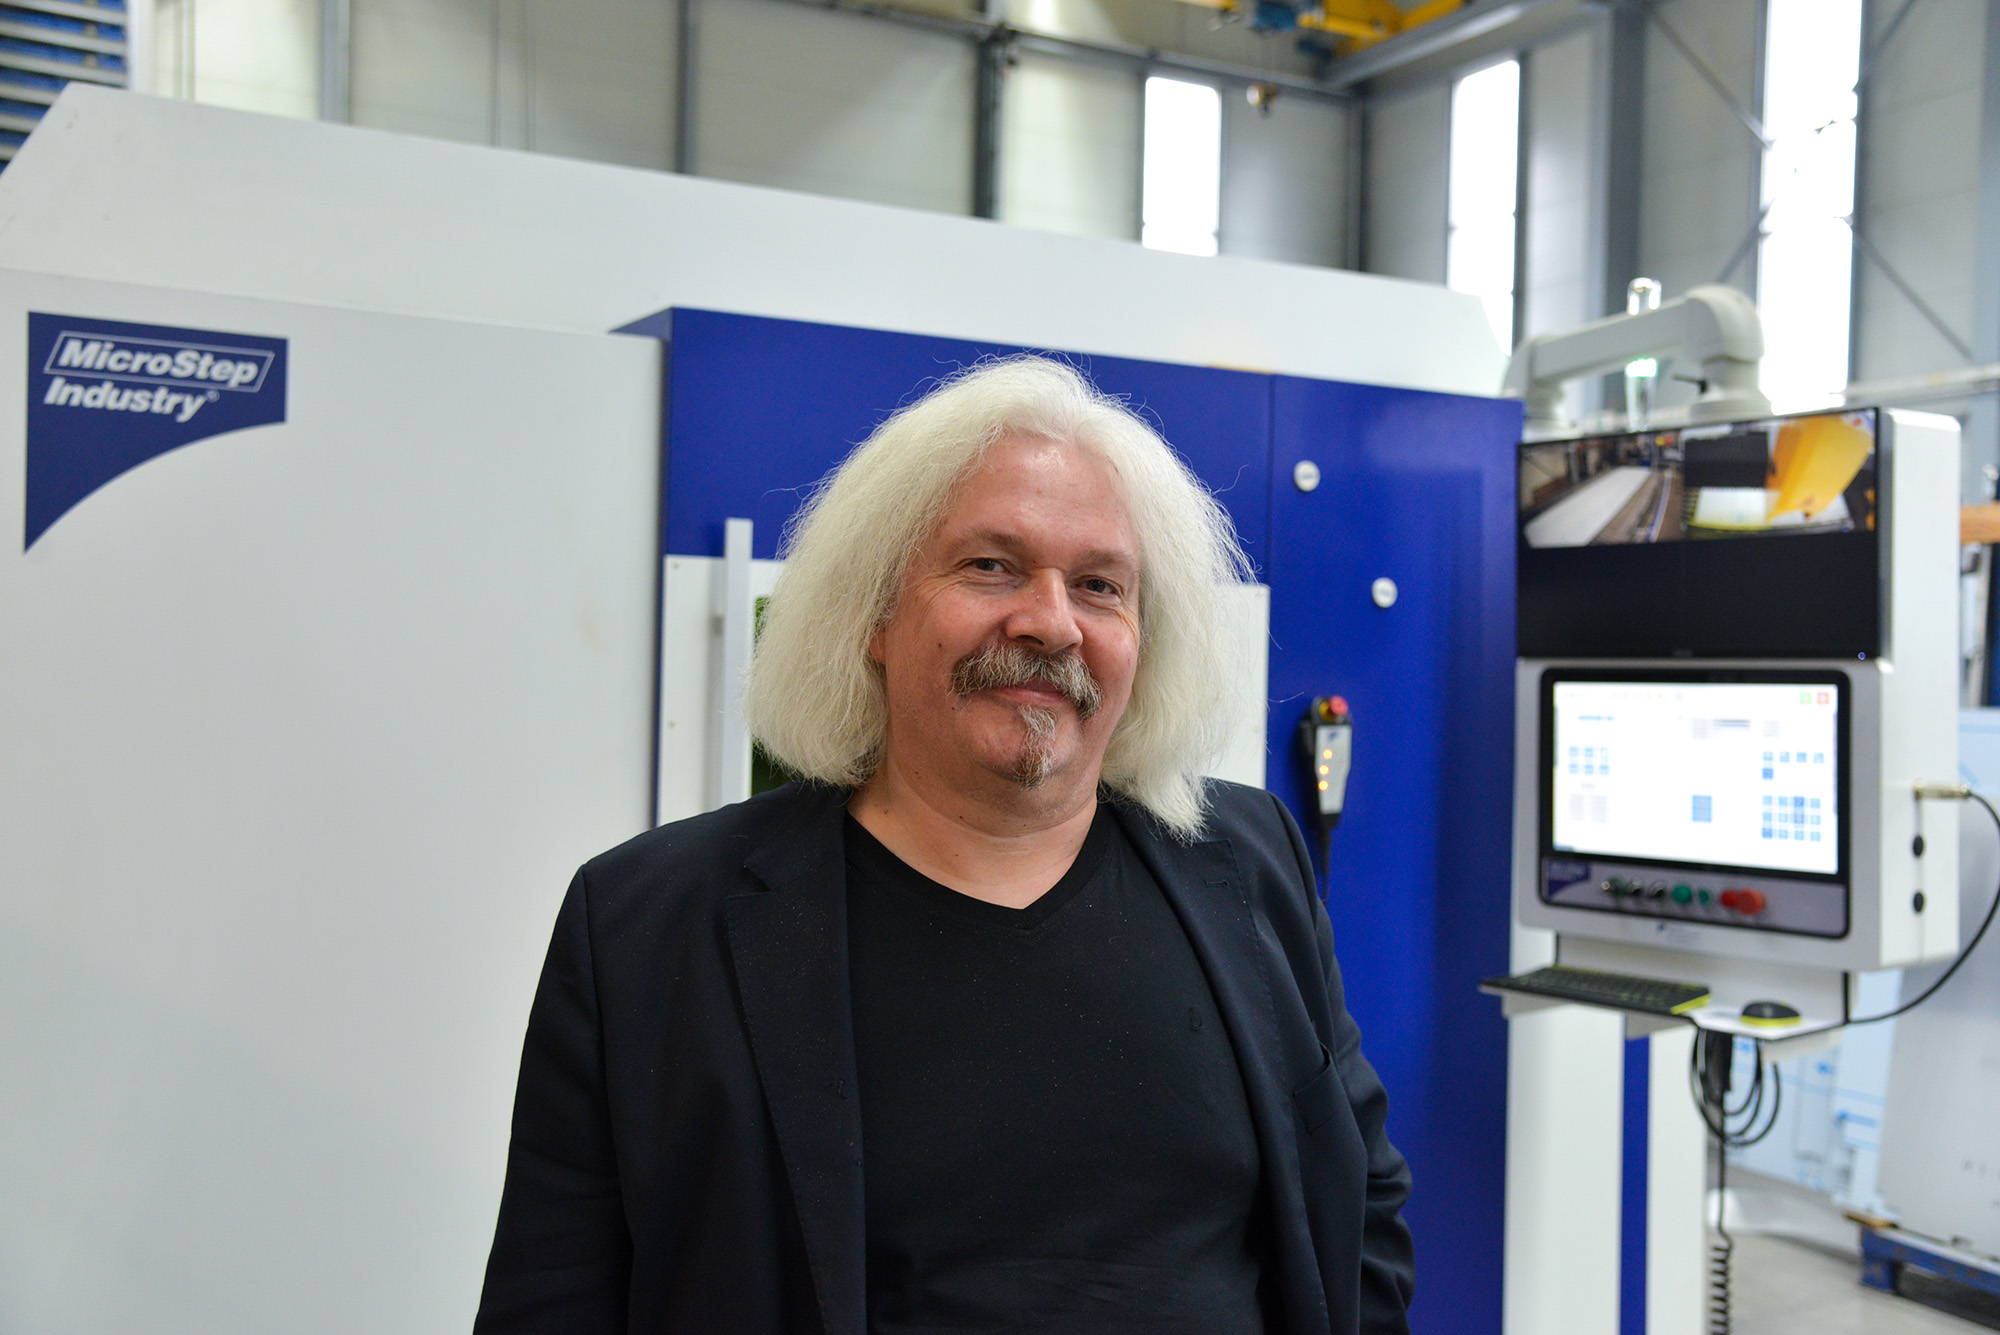 In order to be independent of suppliers, Metallbau Früh invests in a laser cutting machine of the MSE Smart series. Anton Früh, owner and managing director, is very satisfied with the purchase: 